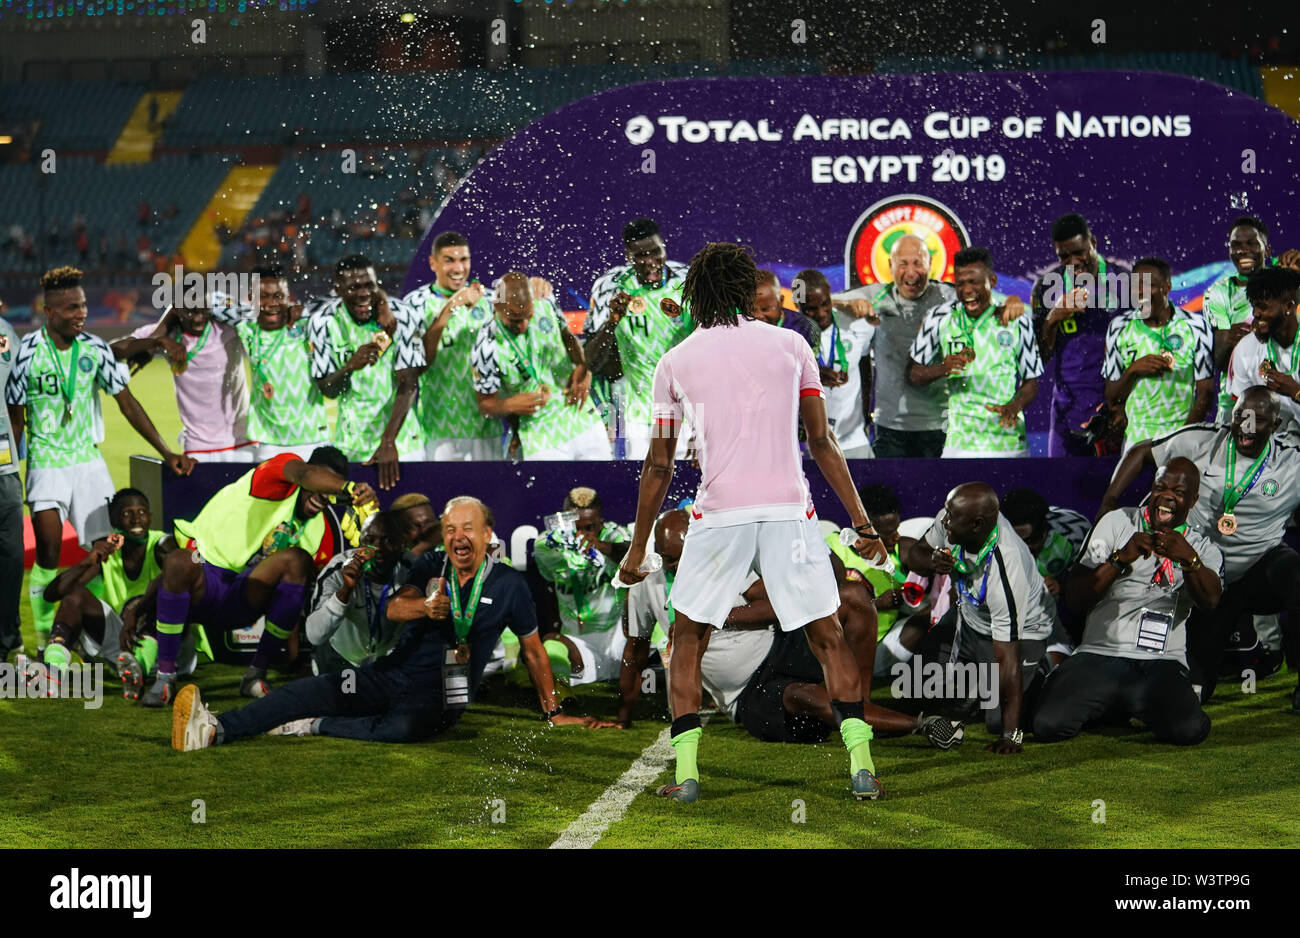 Cairo, Tunisia, Egypt. 17th July, 2019. FRANCE OUT July 17, 2019: Nigerian team celebrating their medal after the 2019 African Cup of Nations match between Tunisia and Nigeria at the Al Salam Stadium in Cairo, Egypt. Ulrik Pedersen/CSM/Alamy Live News Stock Photo